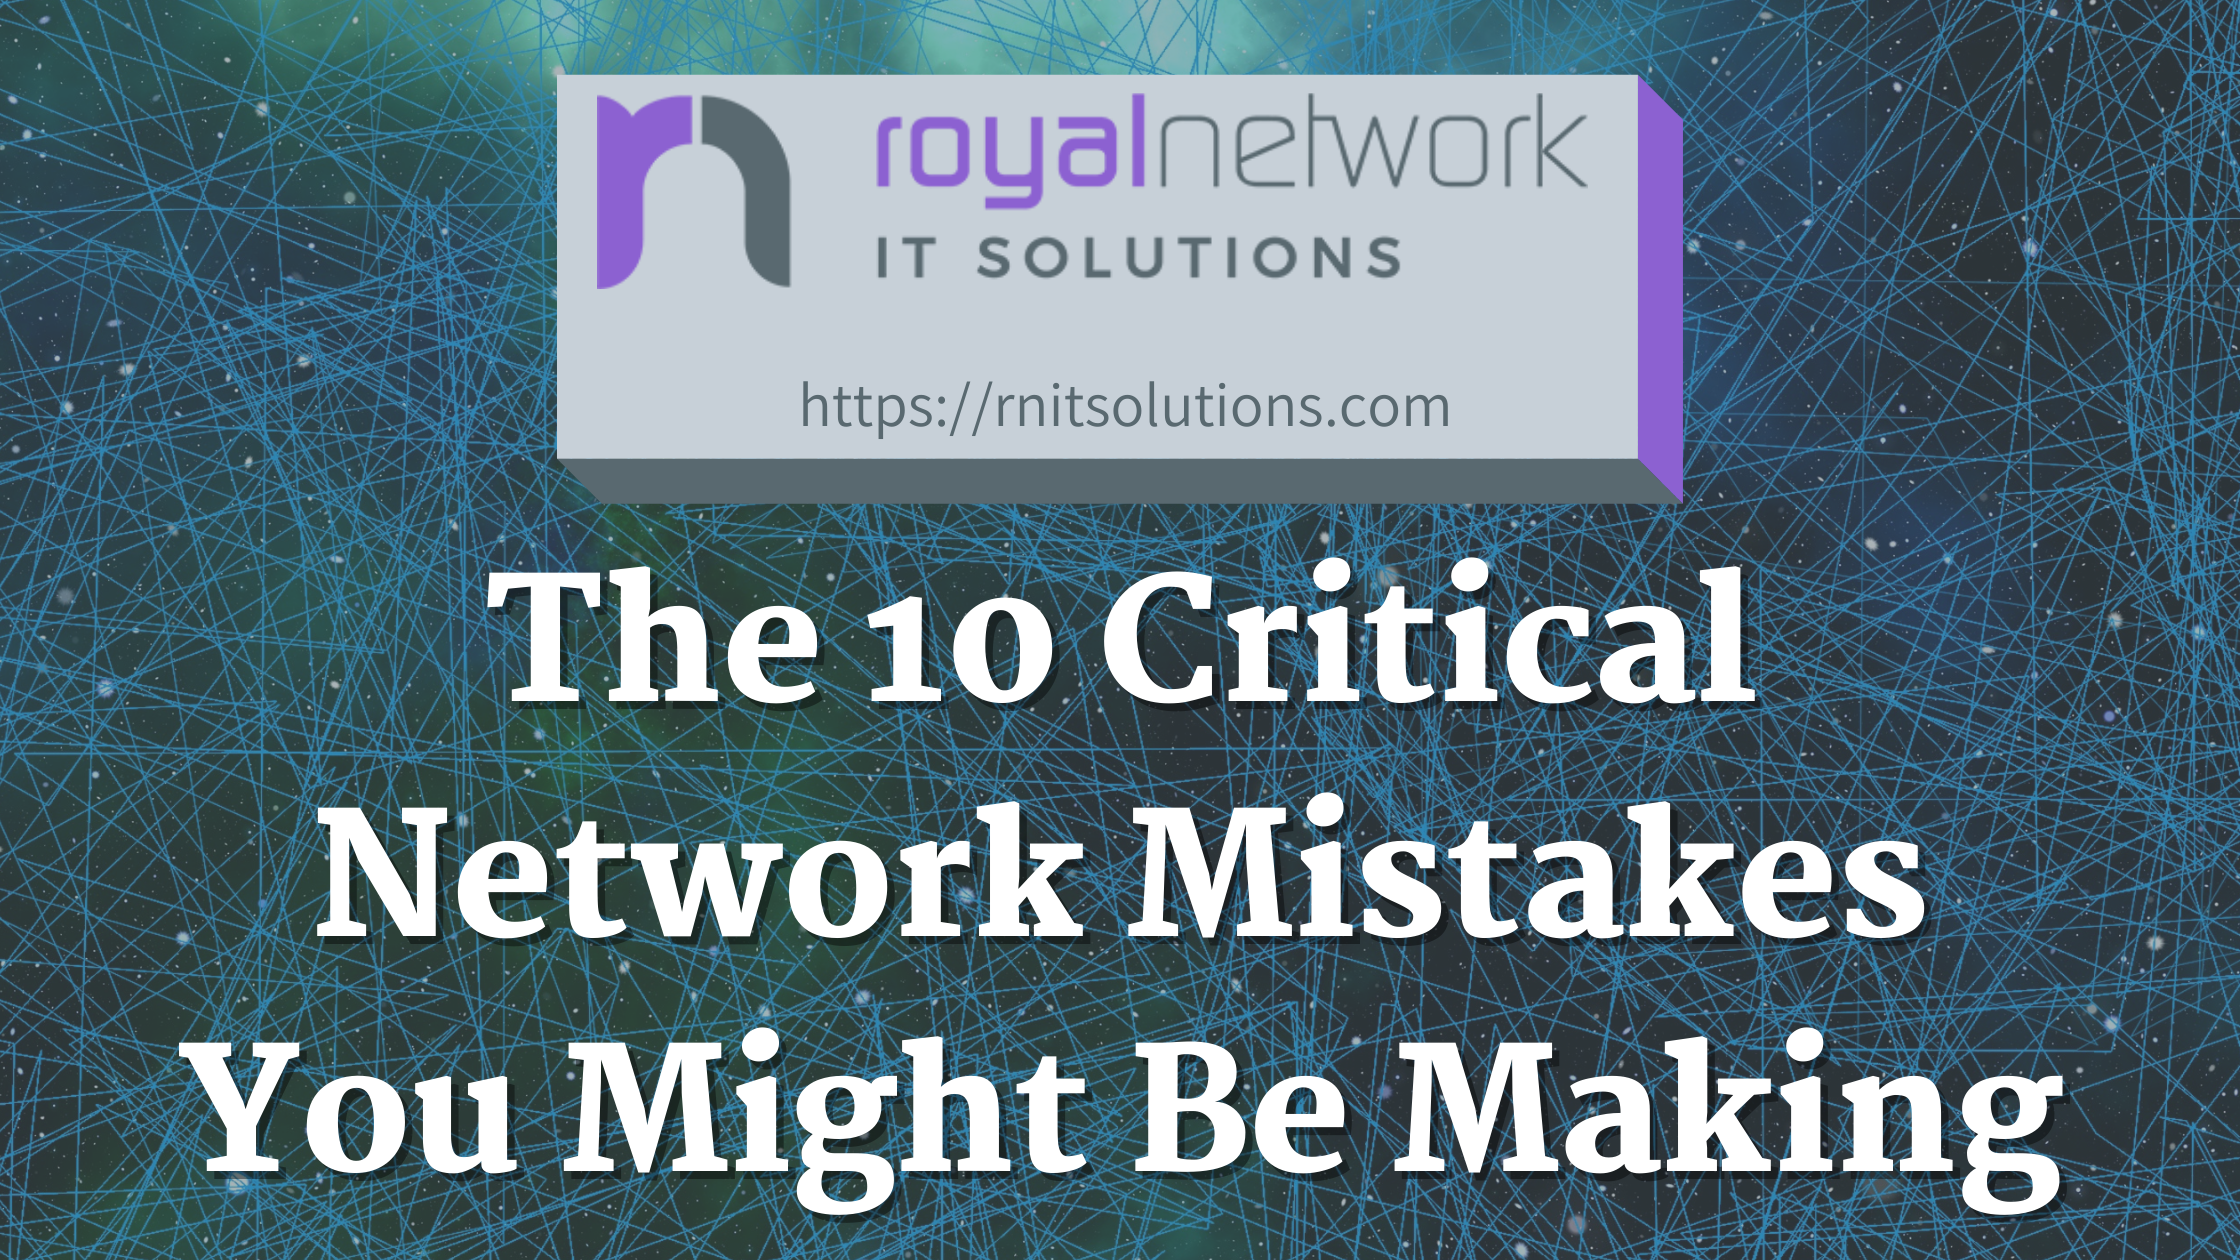 The 10 Critical Network Mistakes You Might Be Making